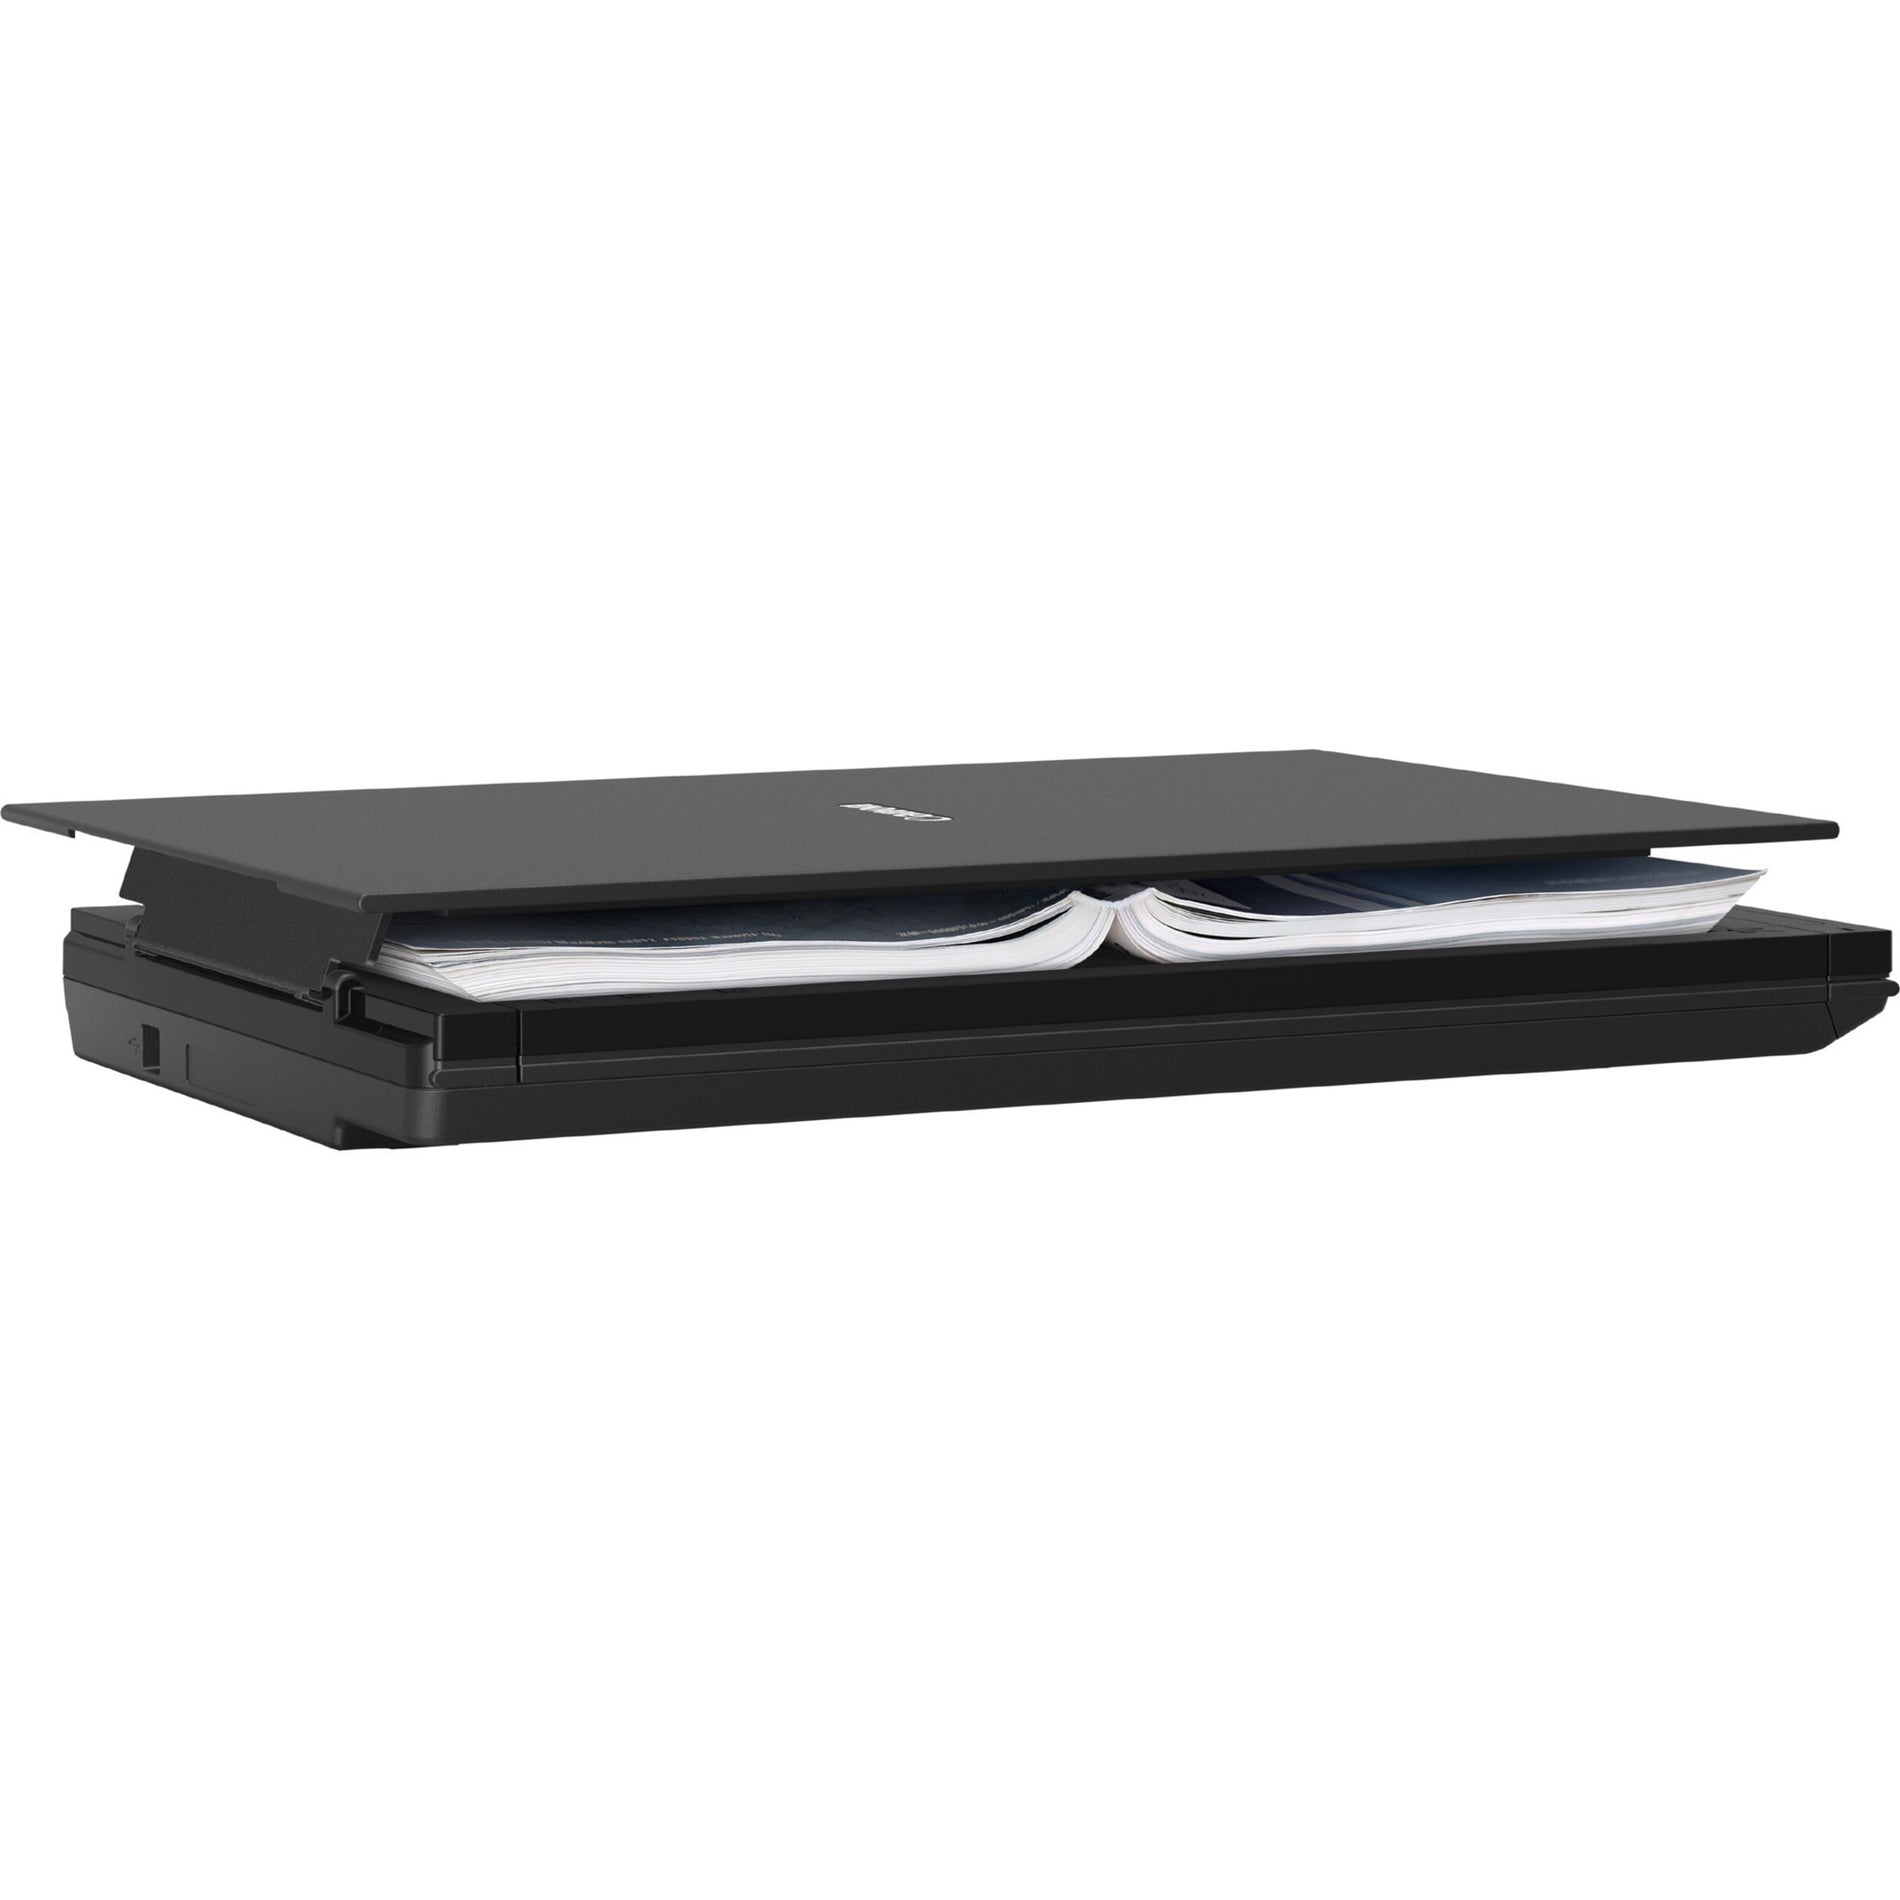 Canon 2995C002 CanoScan LiDE 300 Flatbed Scanner - High Resolution Scanning, USB Connectivity